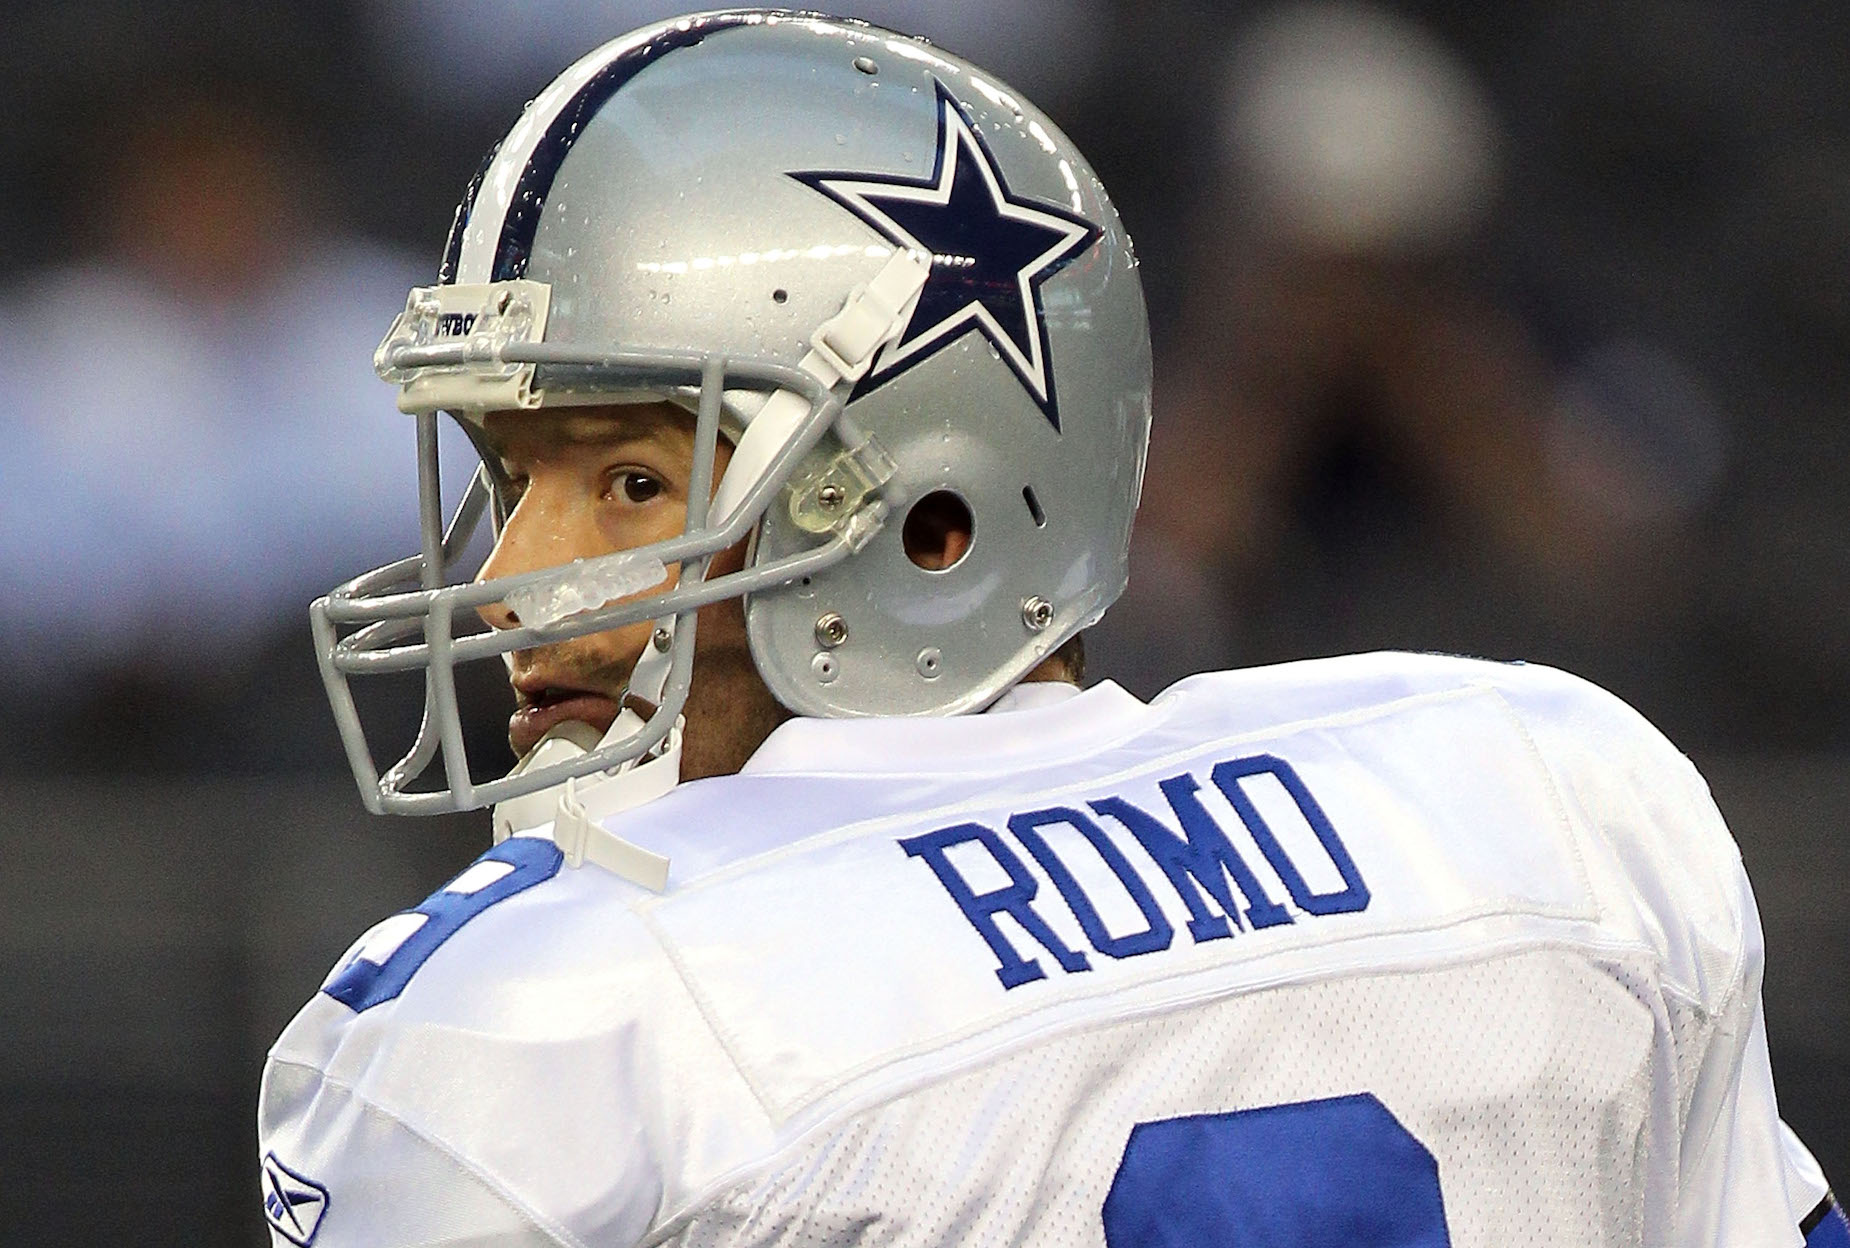 Tony Romo's Dallas Cowboys career could have been much different if a stupid risk didn't work out.